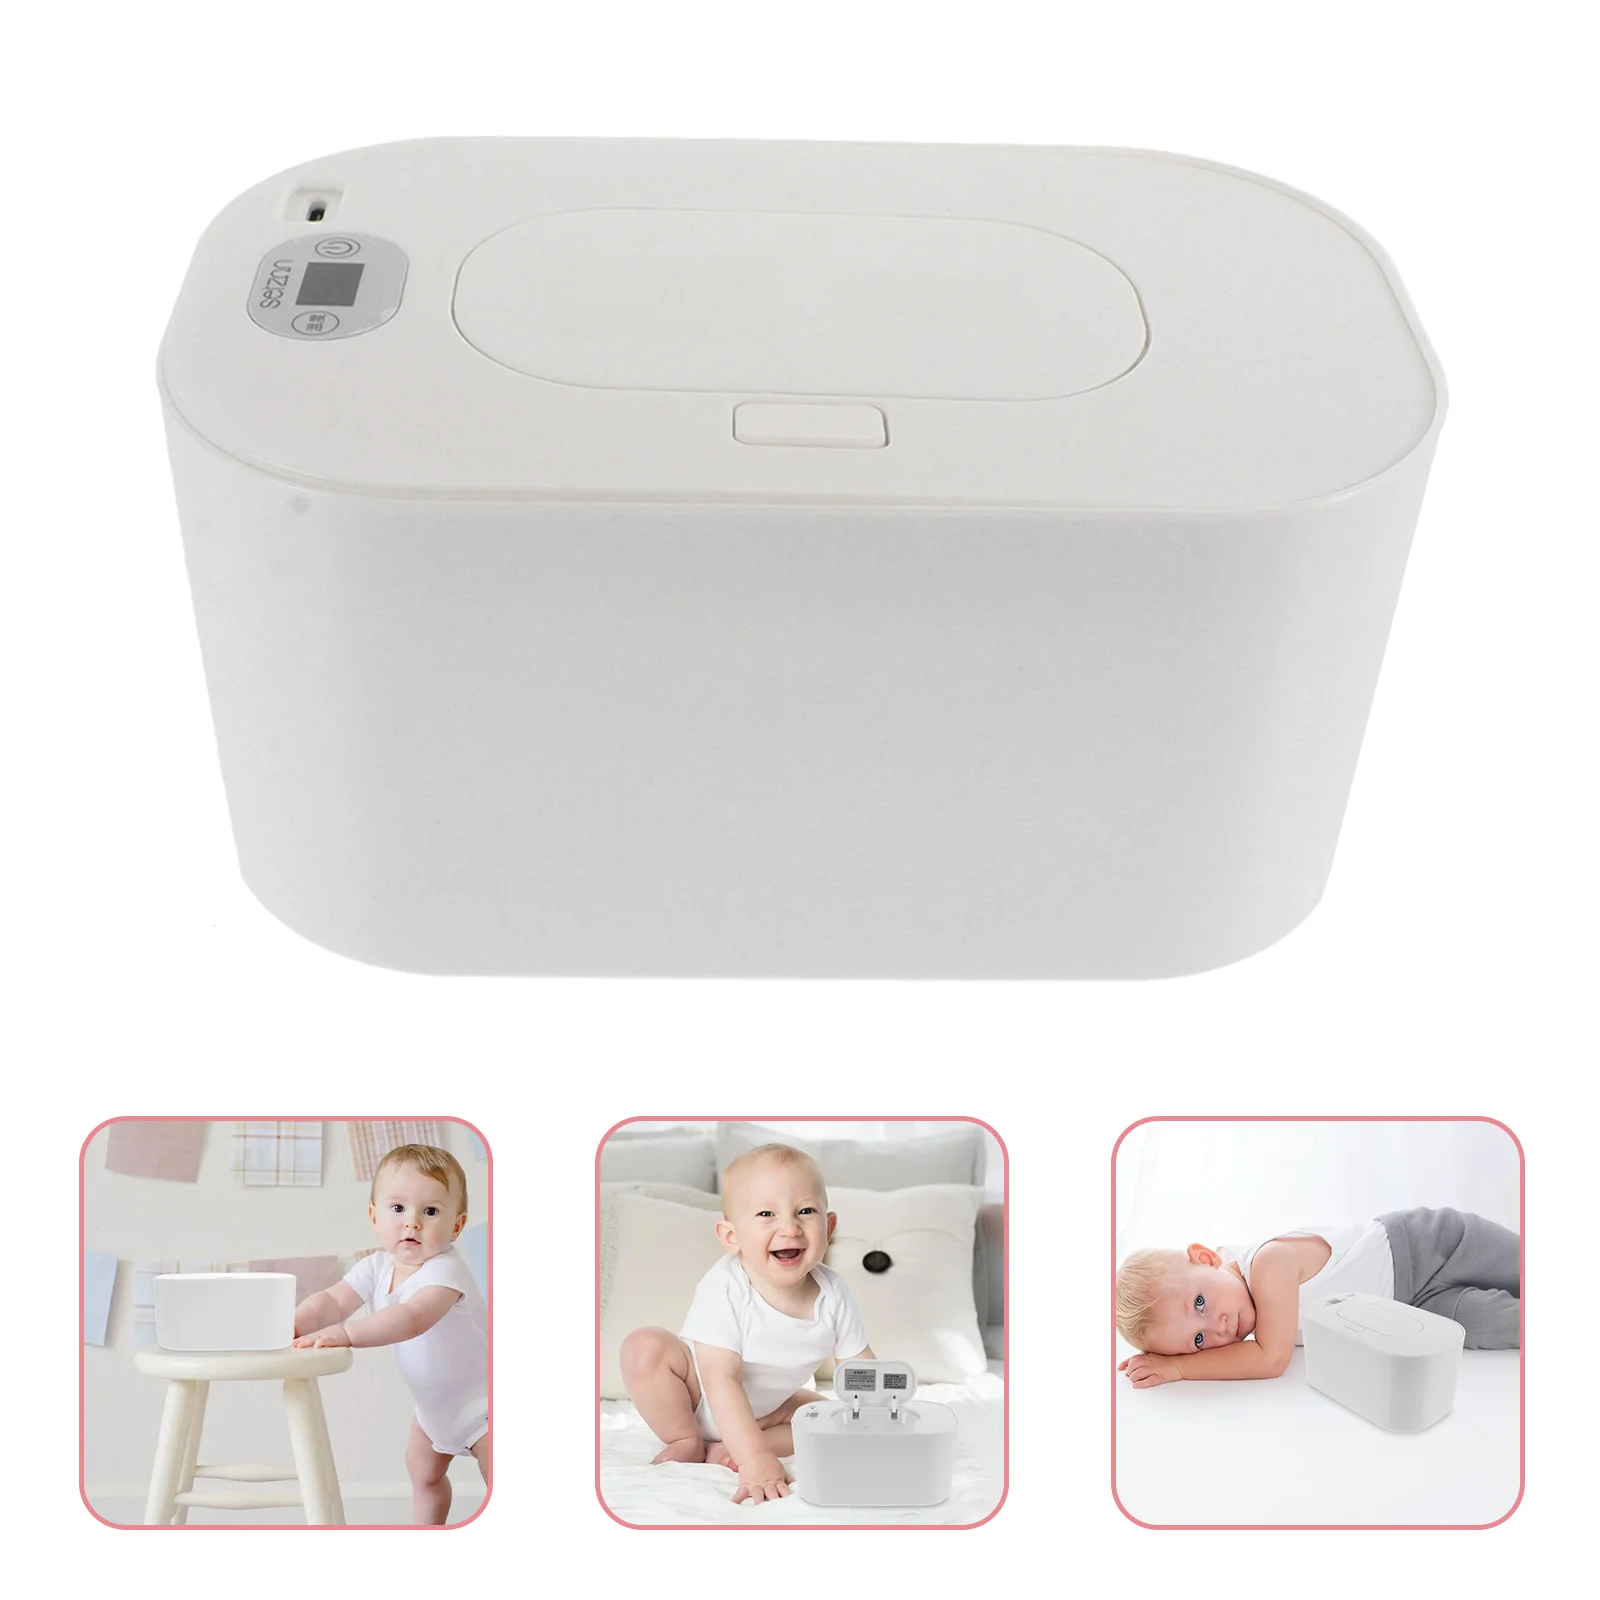 

Wet Wipe Warmer up and Baby Wipes Portable Heating Device Machine for Babies USB Cotton Towel Heater